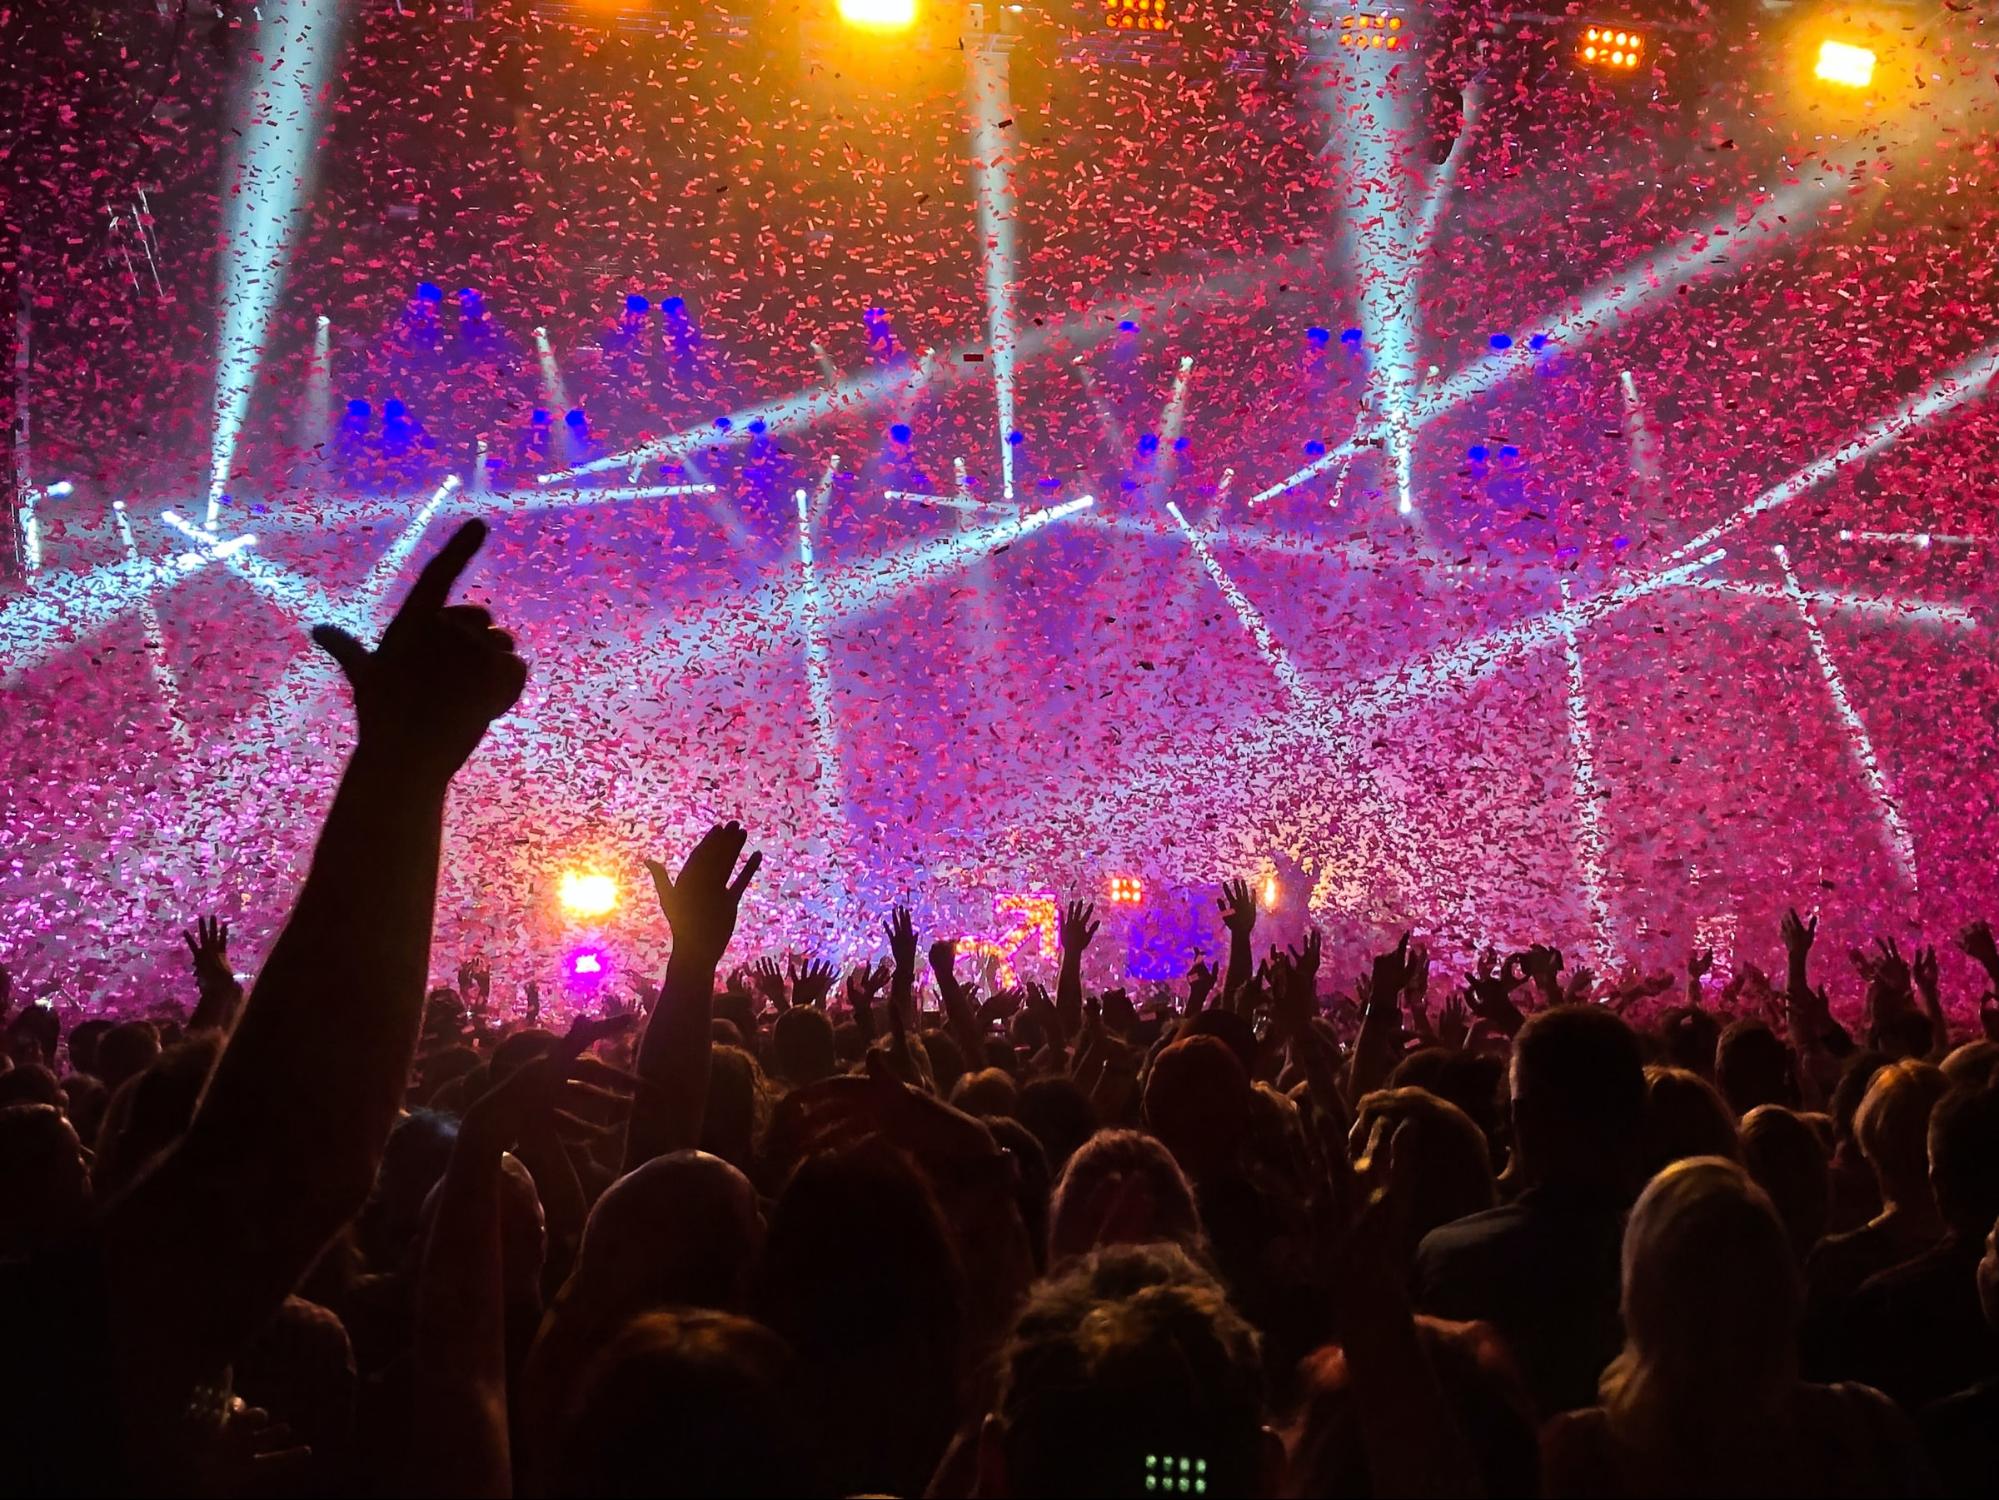 Event Effects - 5 Methods For Creating Stunning Visual Effects At A Concert